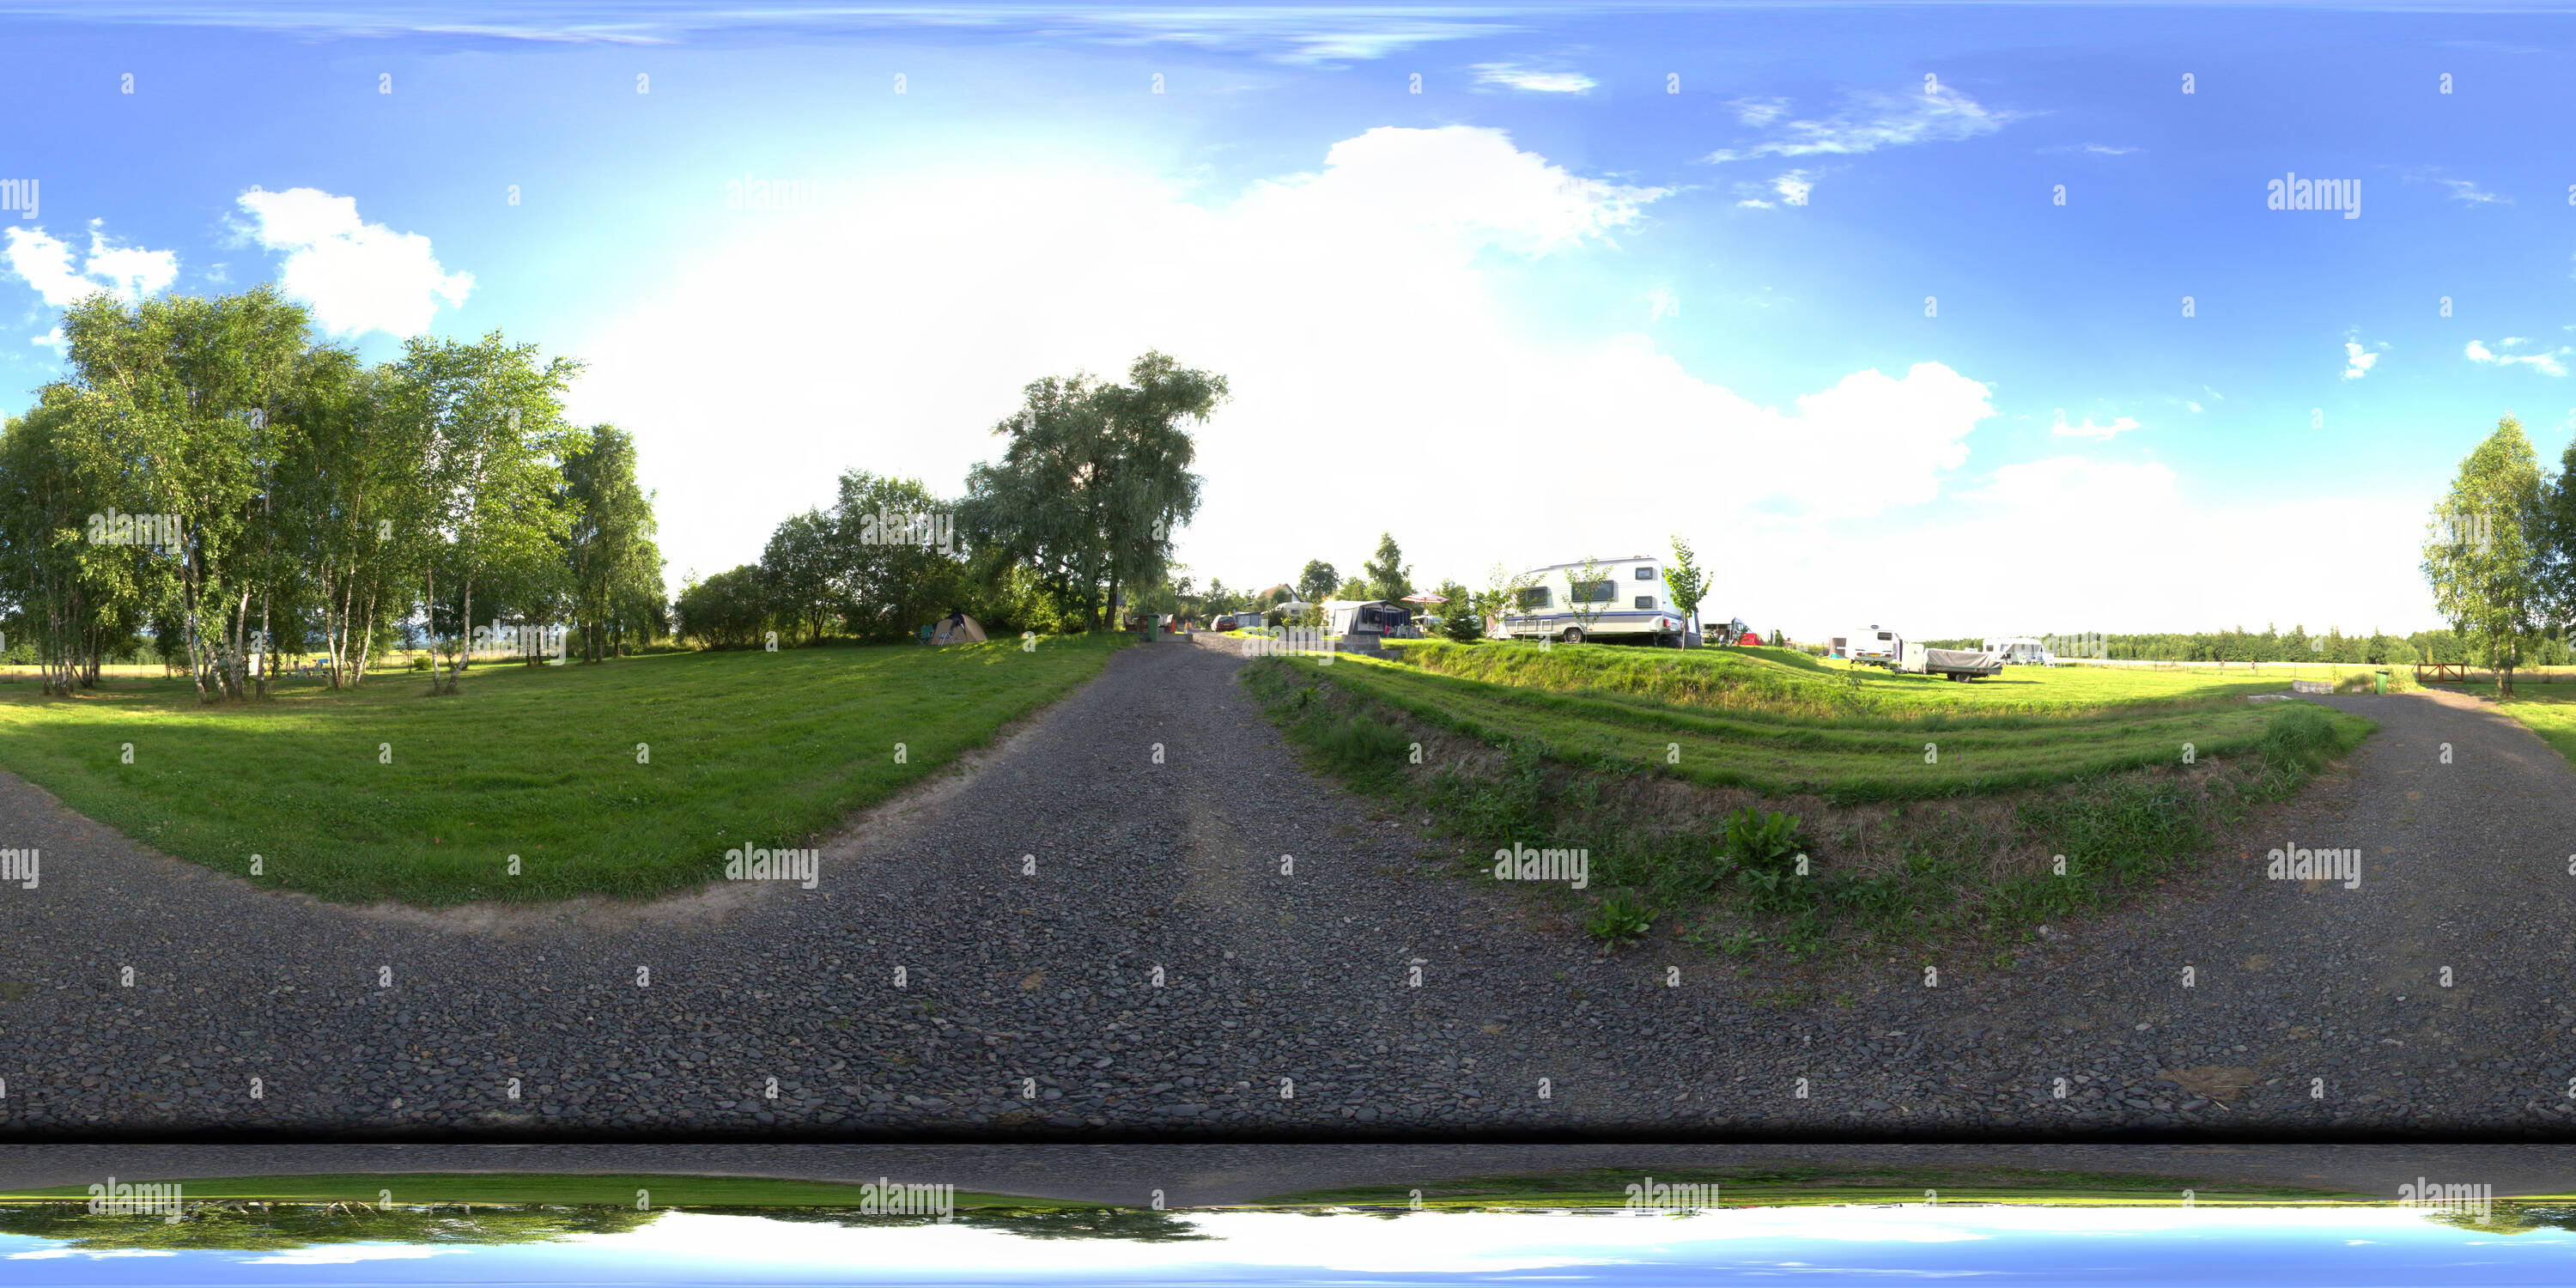 360-view-of-pano-2-camping-mirsk-poland-alamy